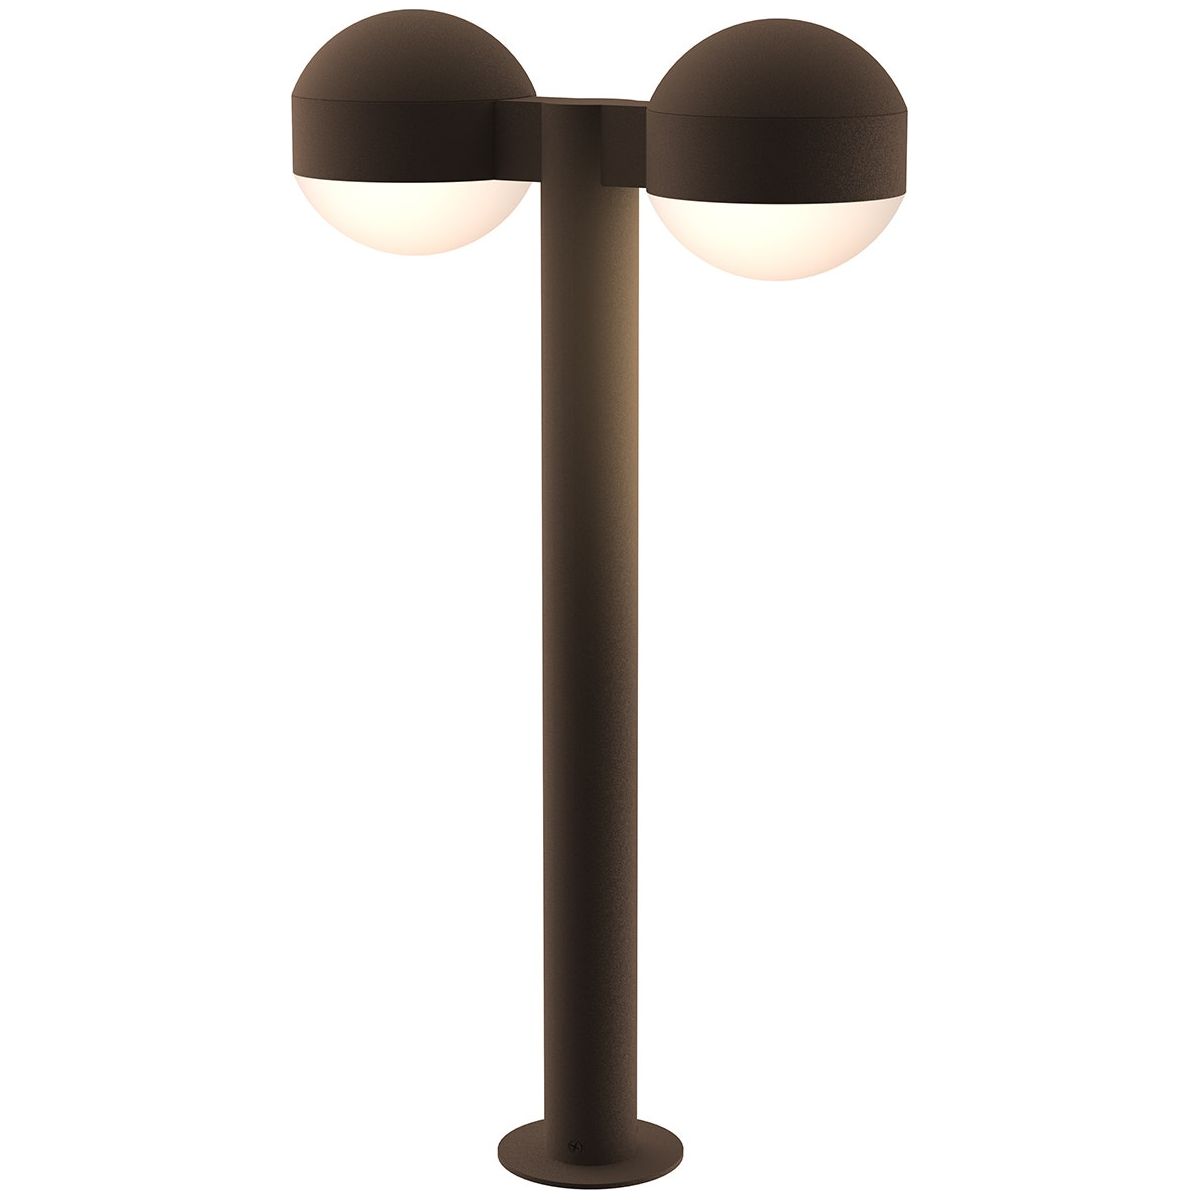 REALS 22" LED Double Bollard with Dome Cap and Dome Lens